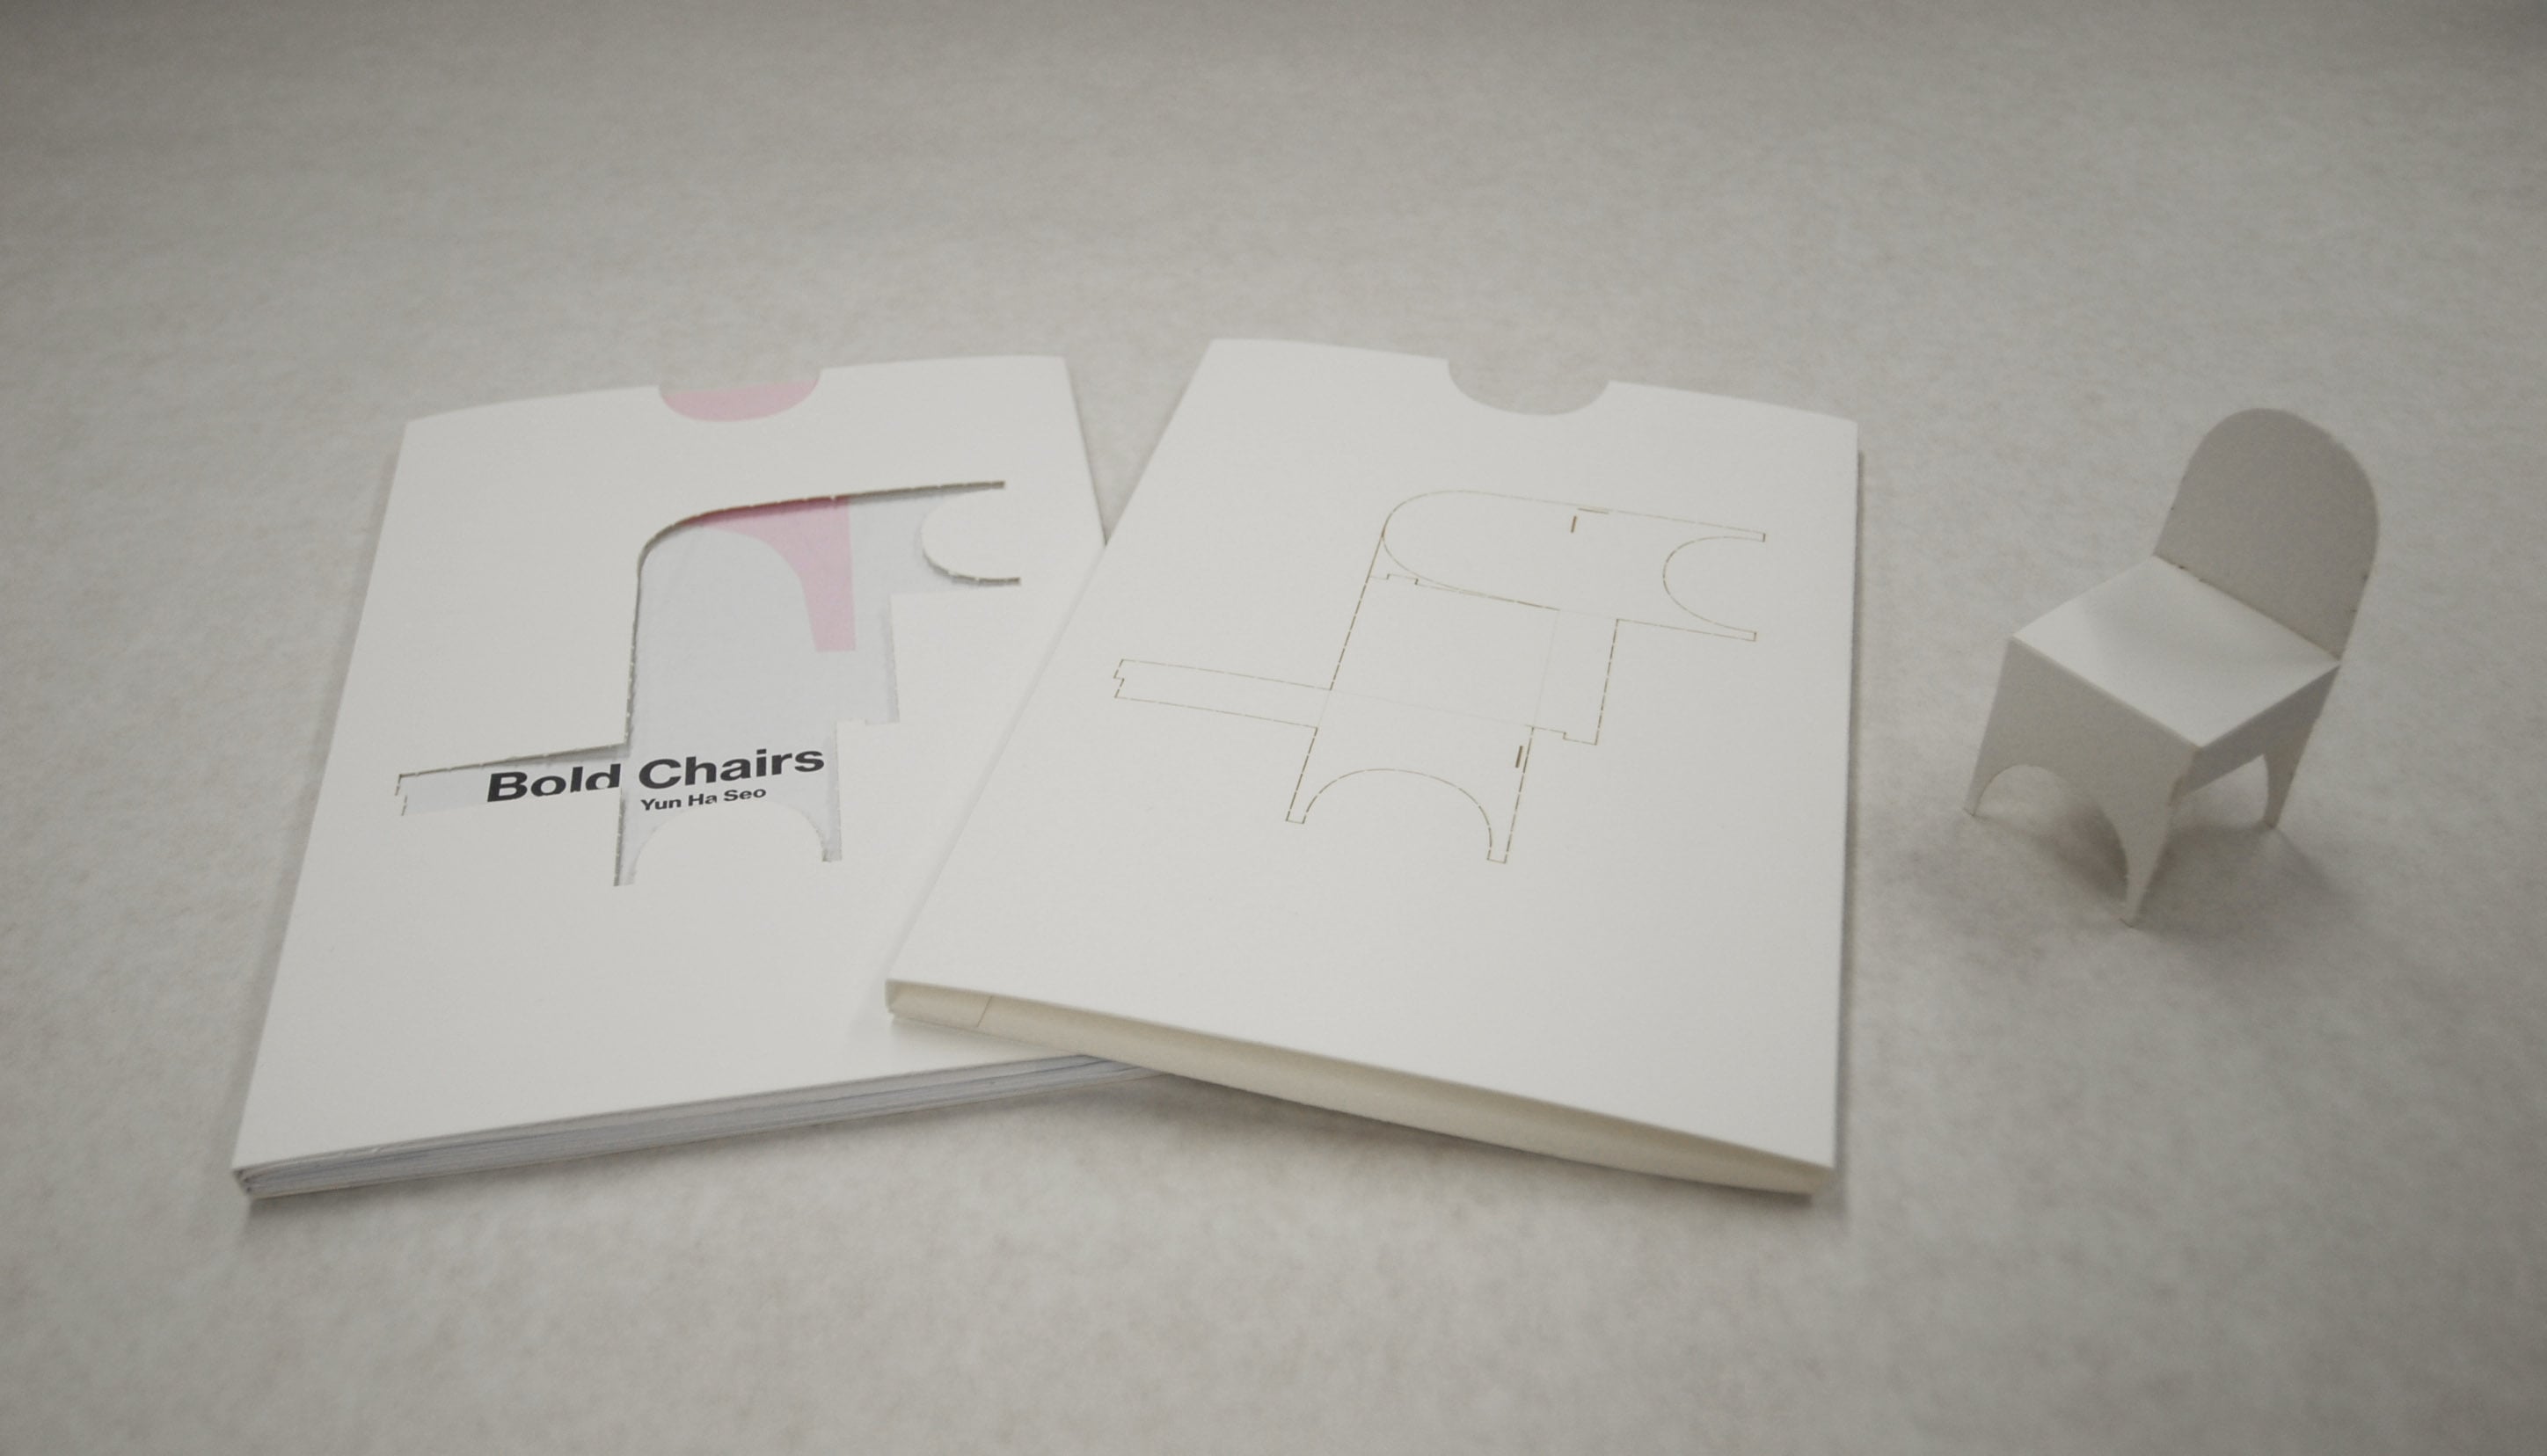 View of the booklet, cover sleeve, and folder chair.